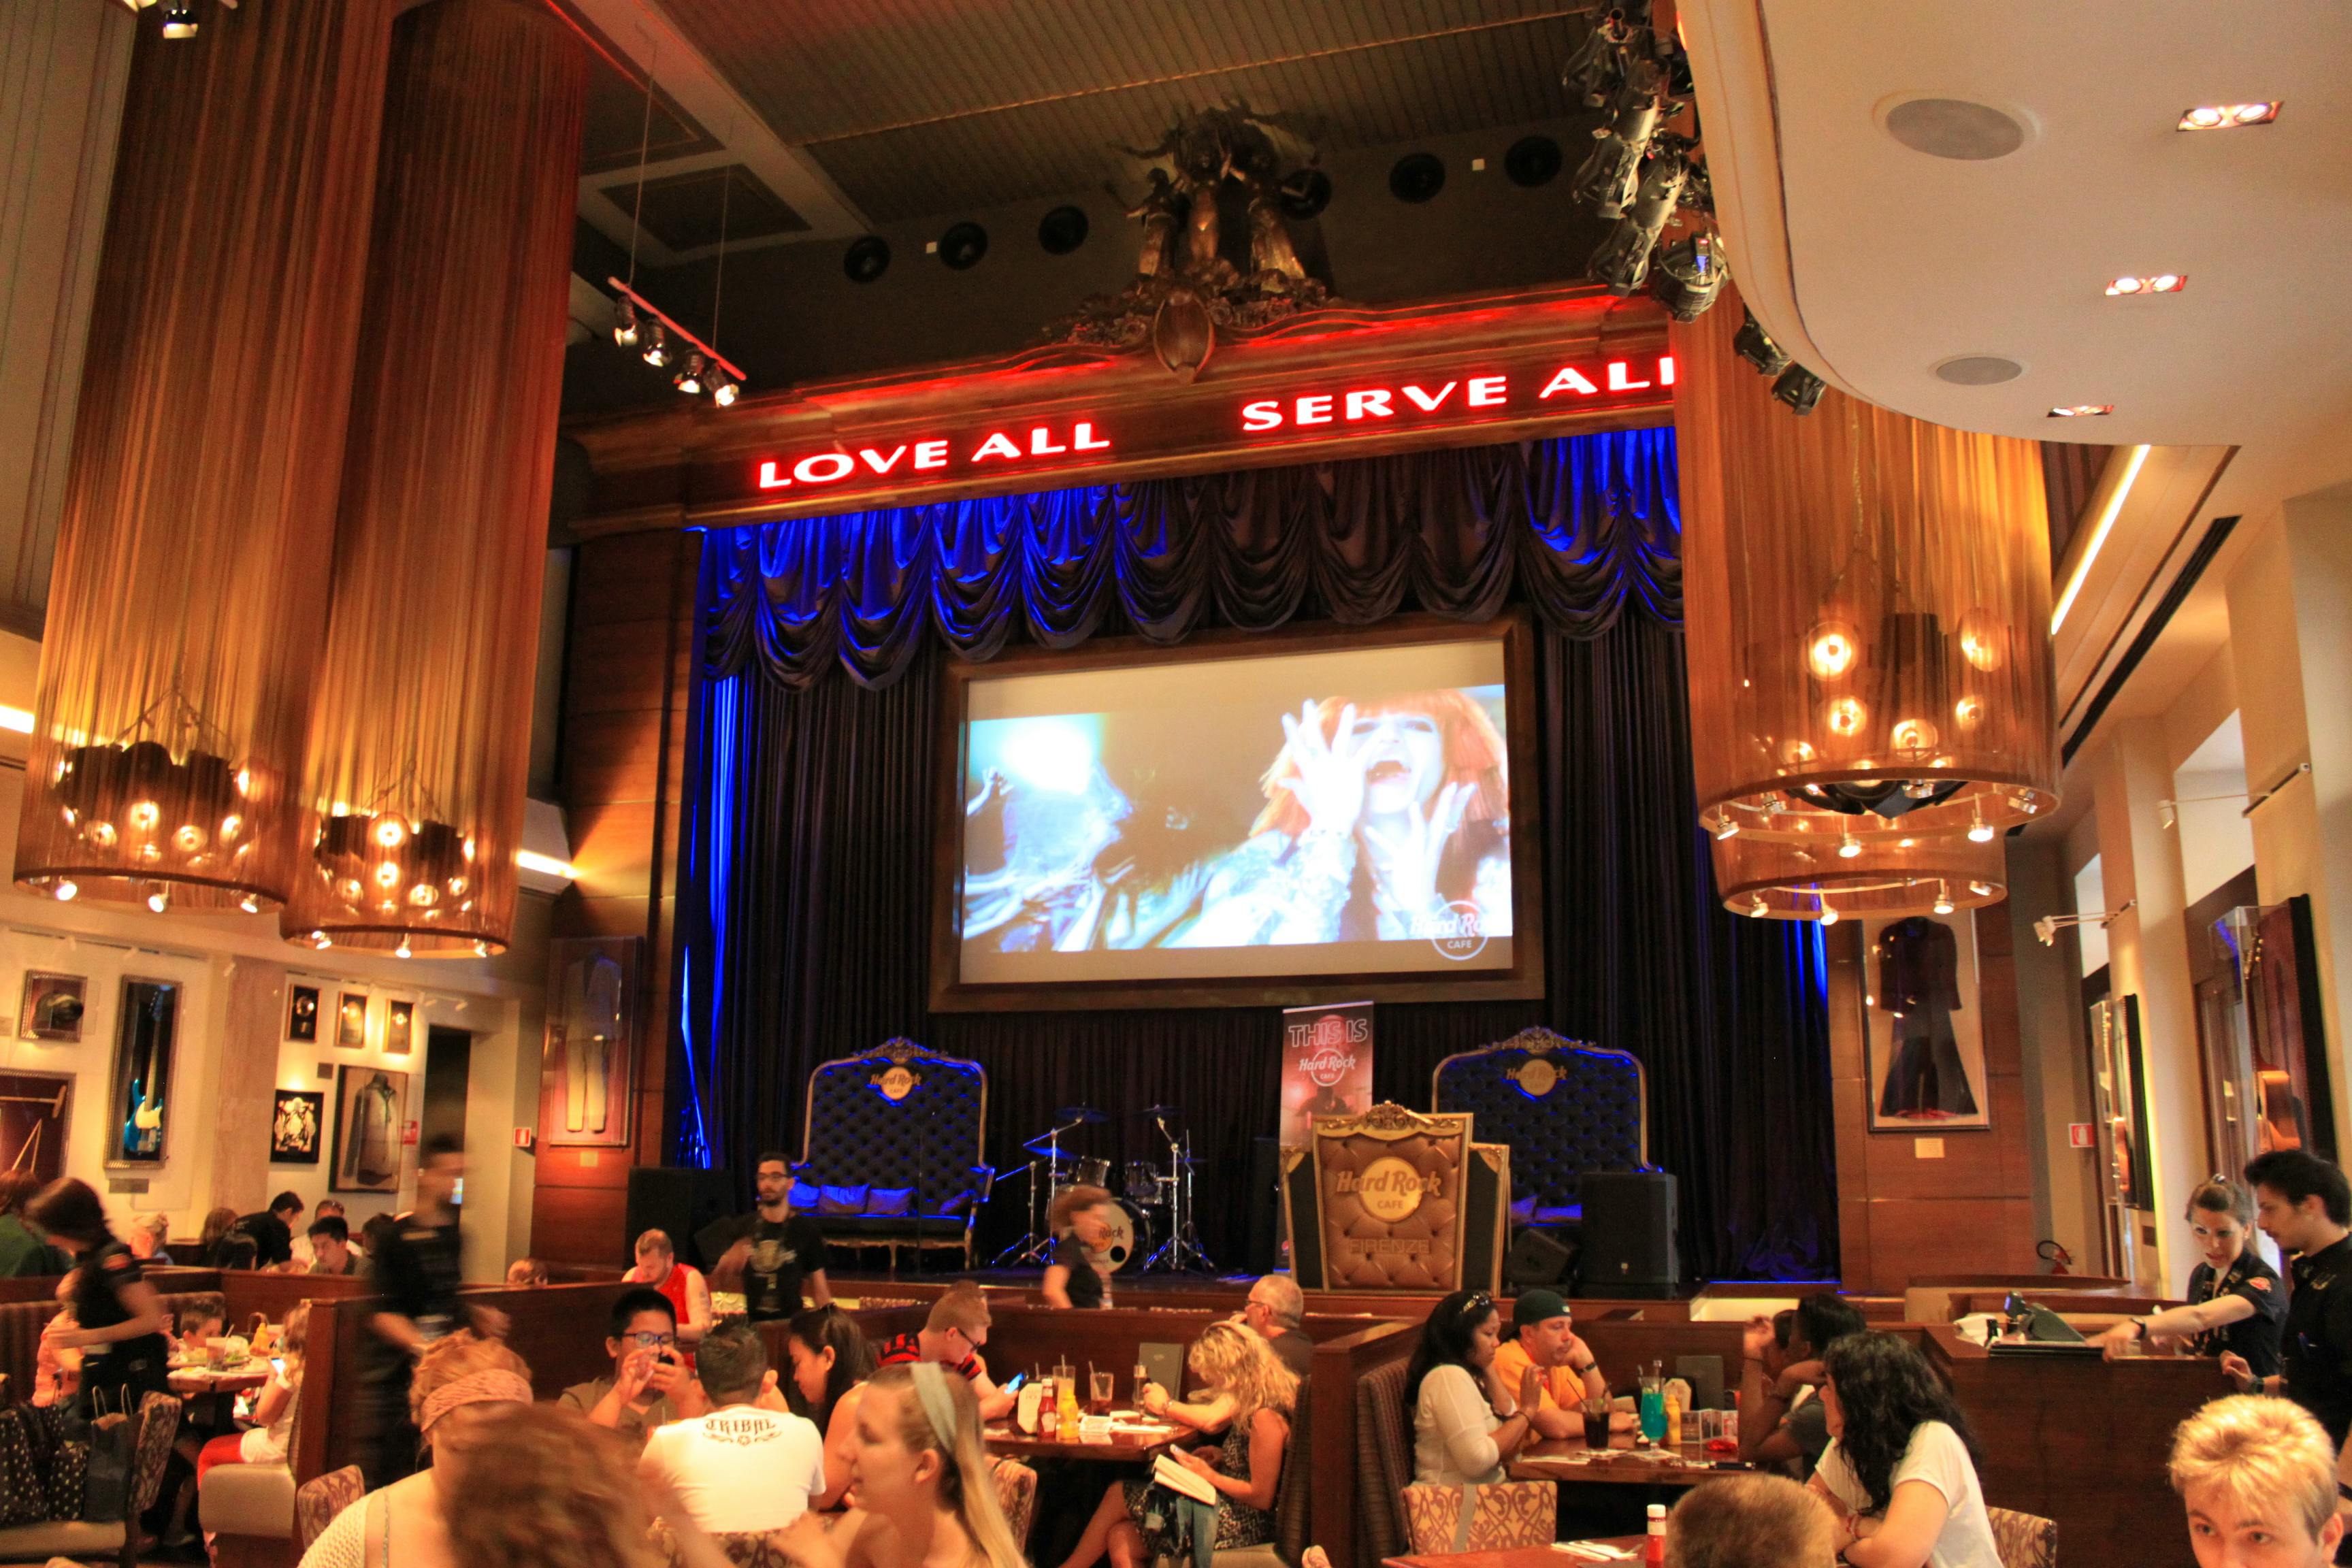 Hard Rock Cafe in Florence: Great Food, Rock Memorabilia and Live Music